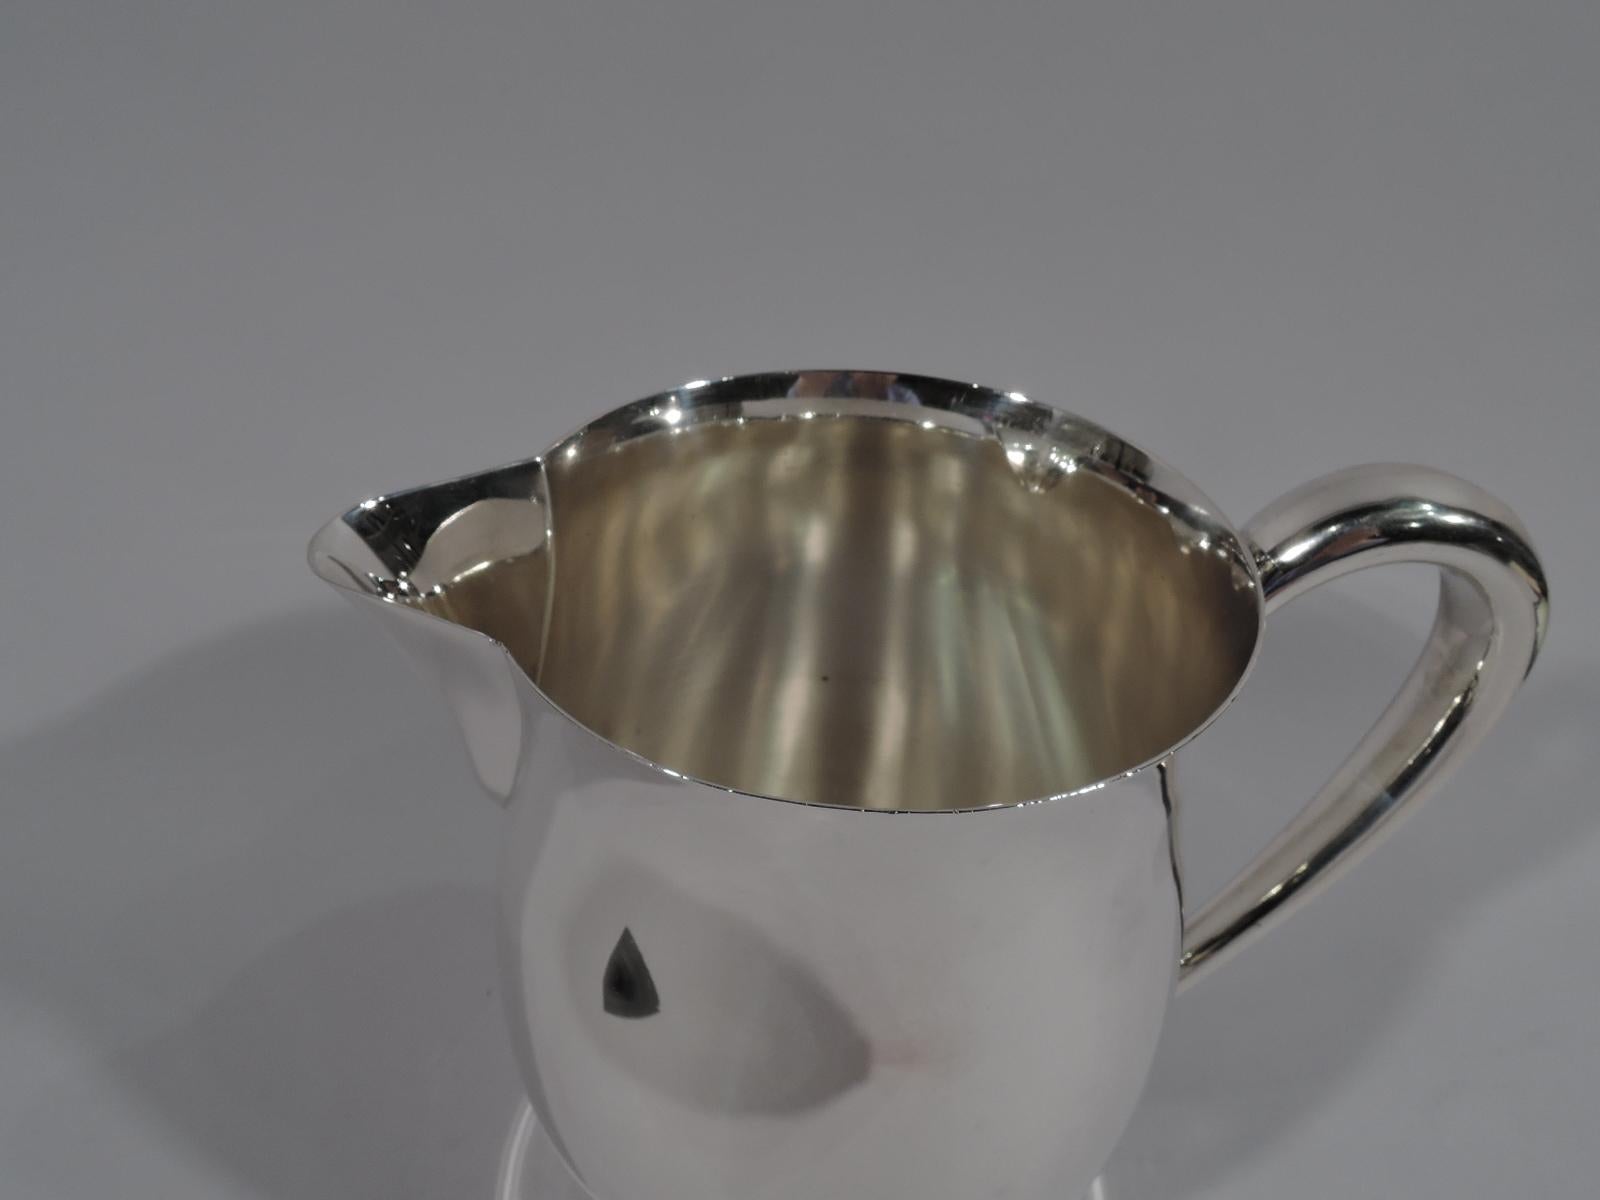 Colonial Revival sterling silver water pitcher. Made by International in Meriden, Conn., circa 1950. Gentle baluster with high-looping handle and V-spout. Traditional form compatible with a Modern table setting. Holds 4 pints. Fully marked including